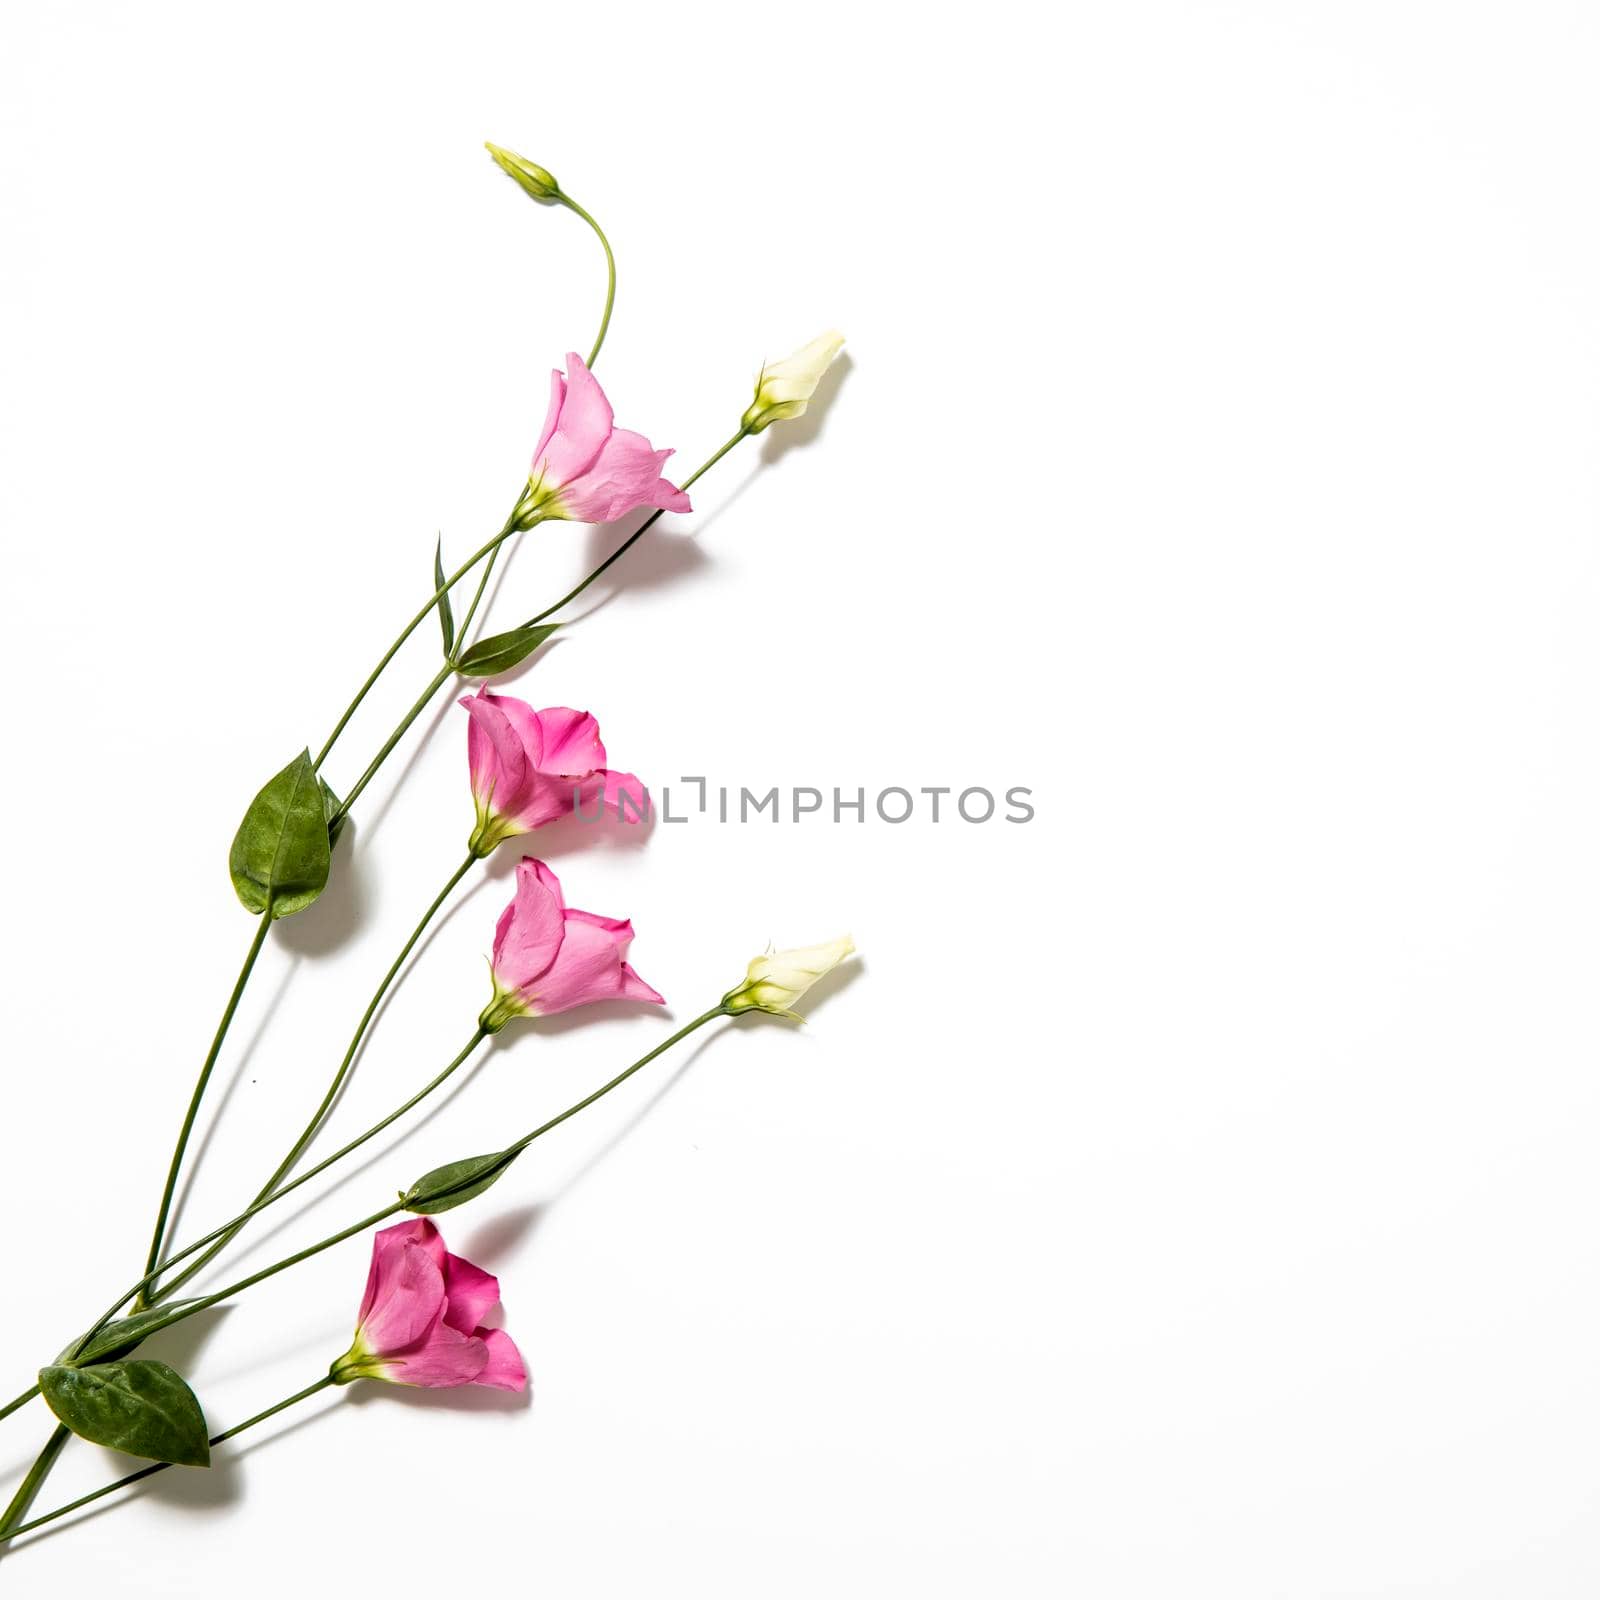 Pink eustoma flowers on white. Empty space for text